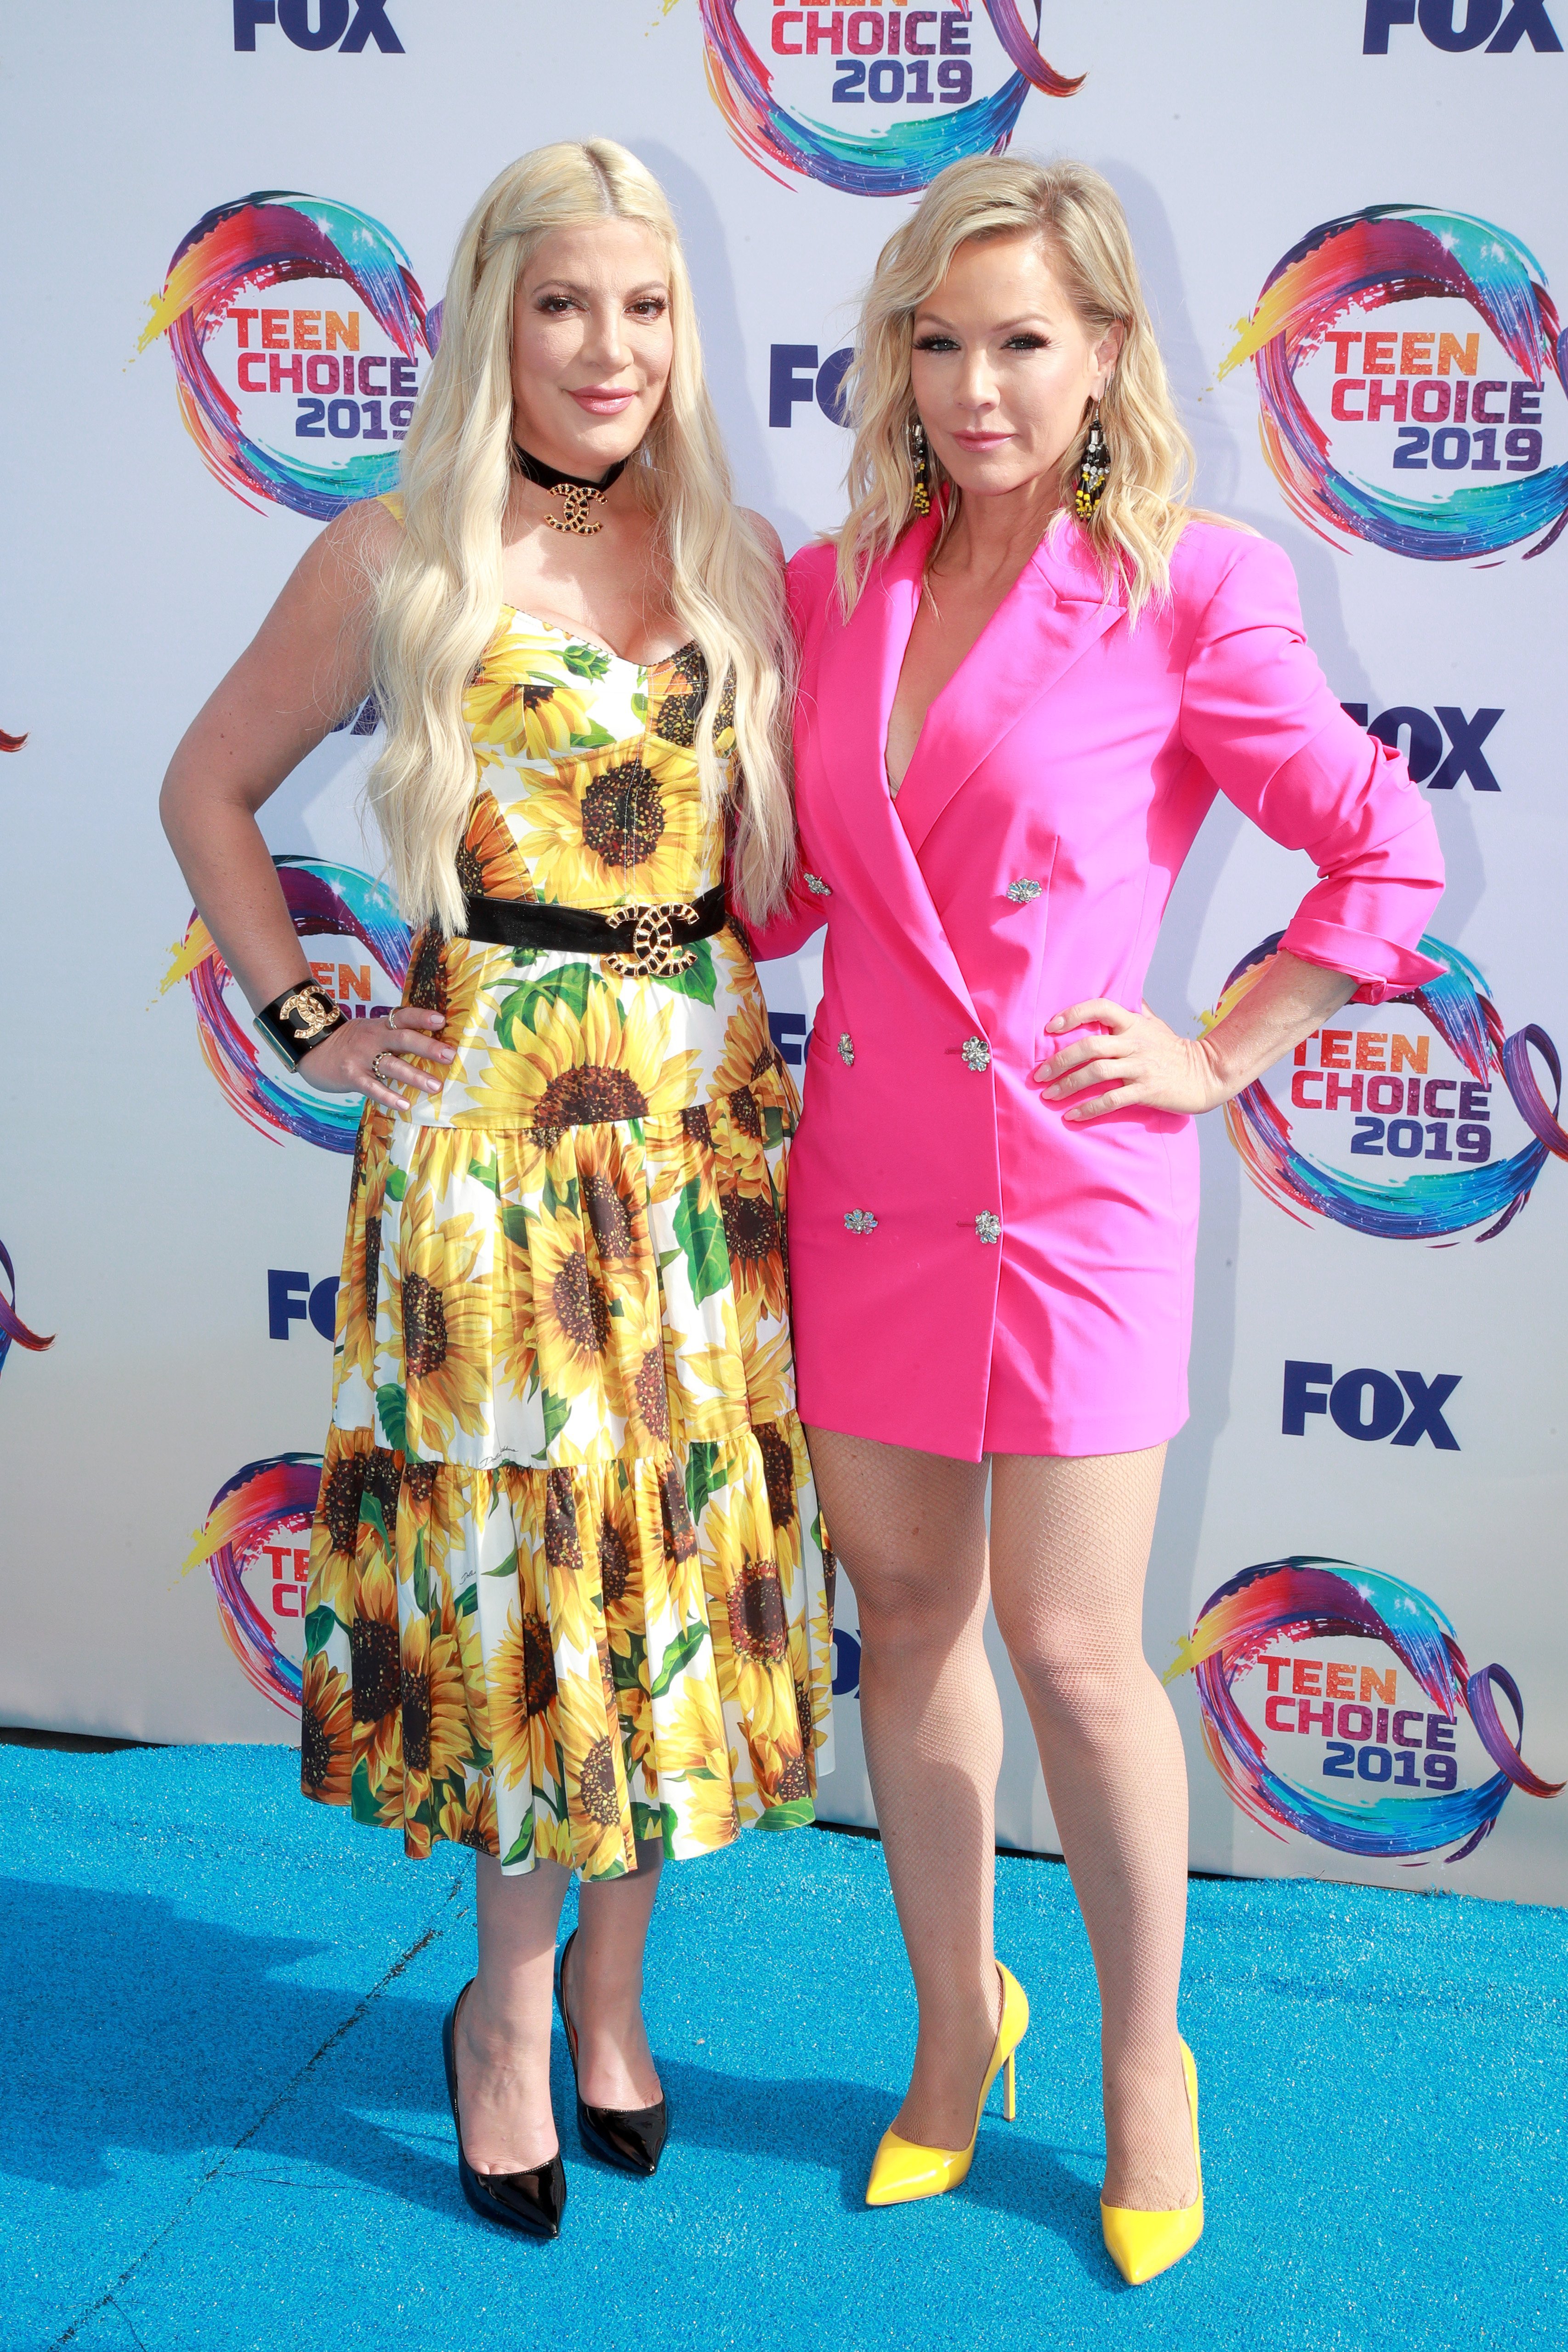 Tori Spelling and Jennie Garth attend Fox's Teen Choice Awards in Hermosa Beach, California on August 11, 2019 | Photo: Getty Images